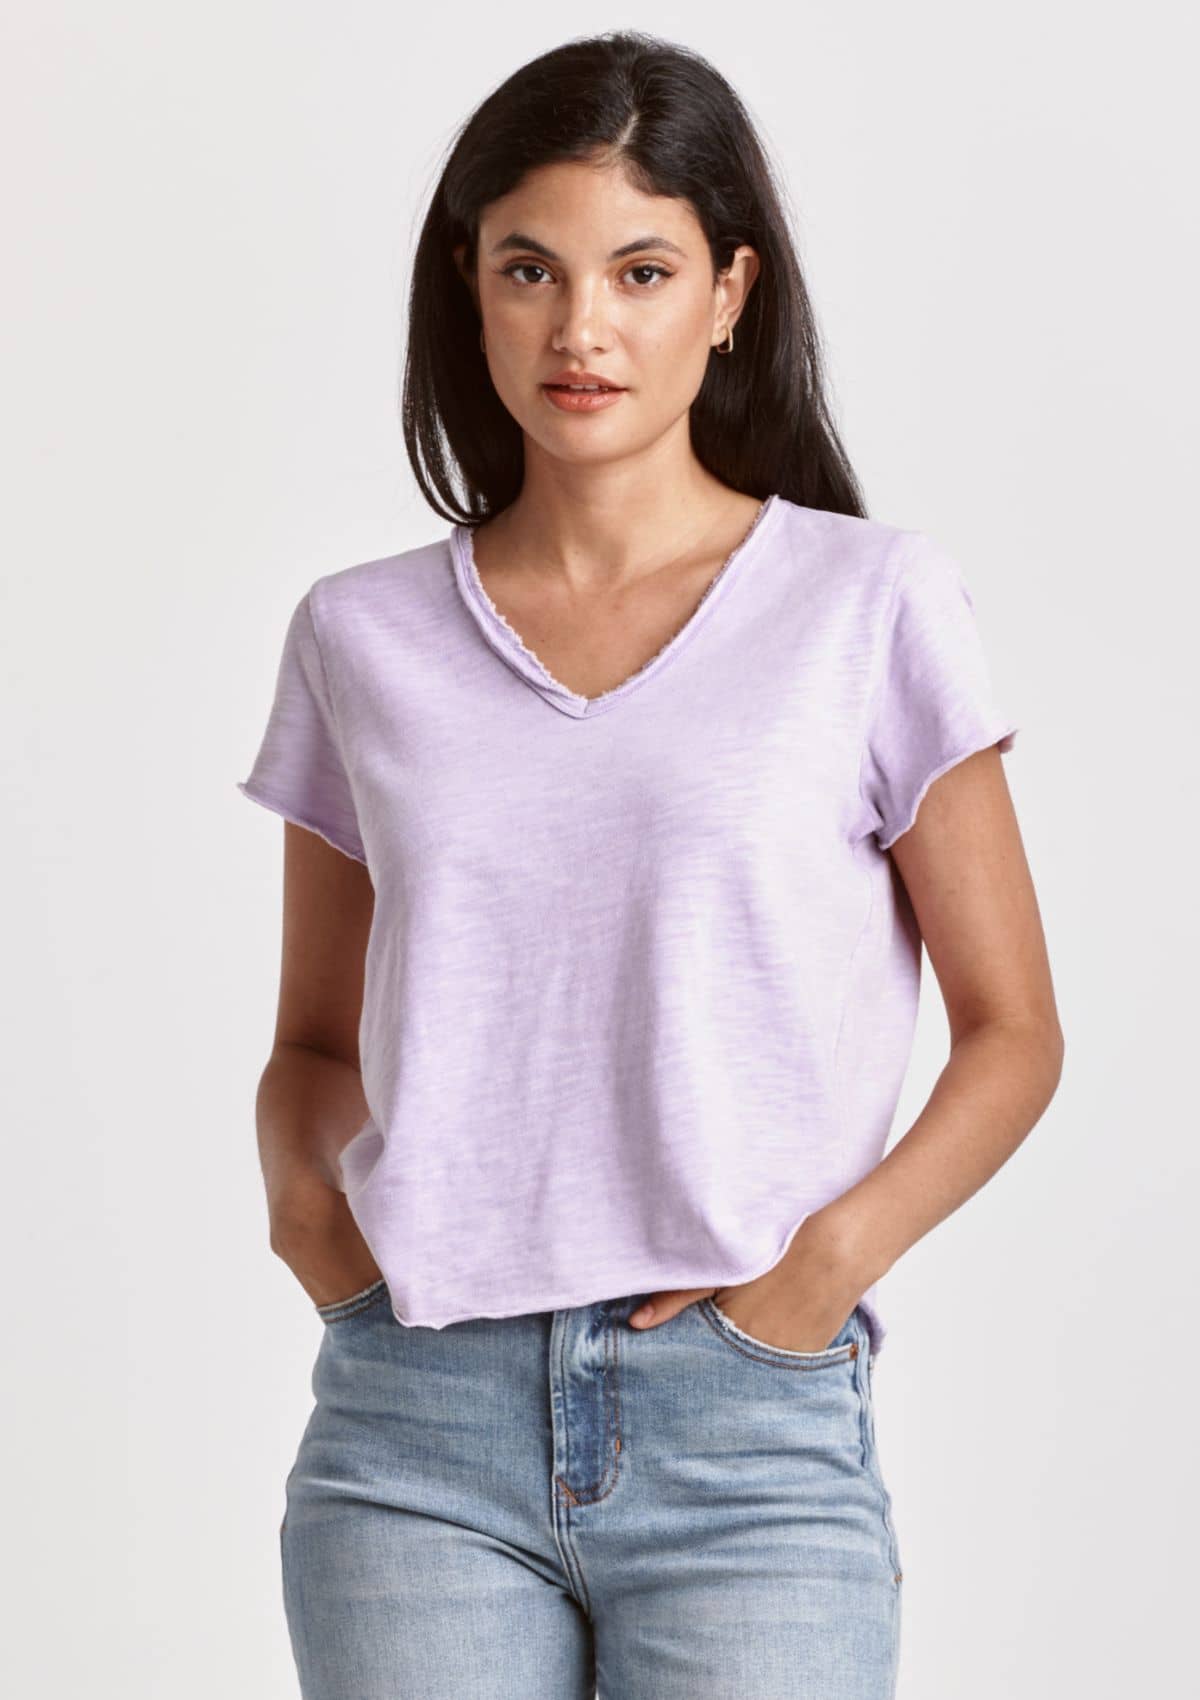 Casual Tops-Clothing-Fashion-Ruby Jane.